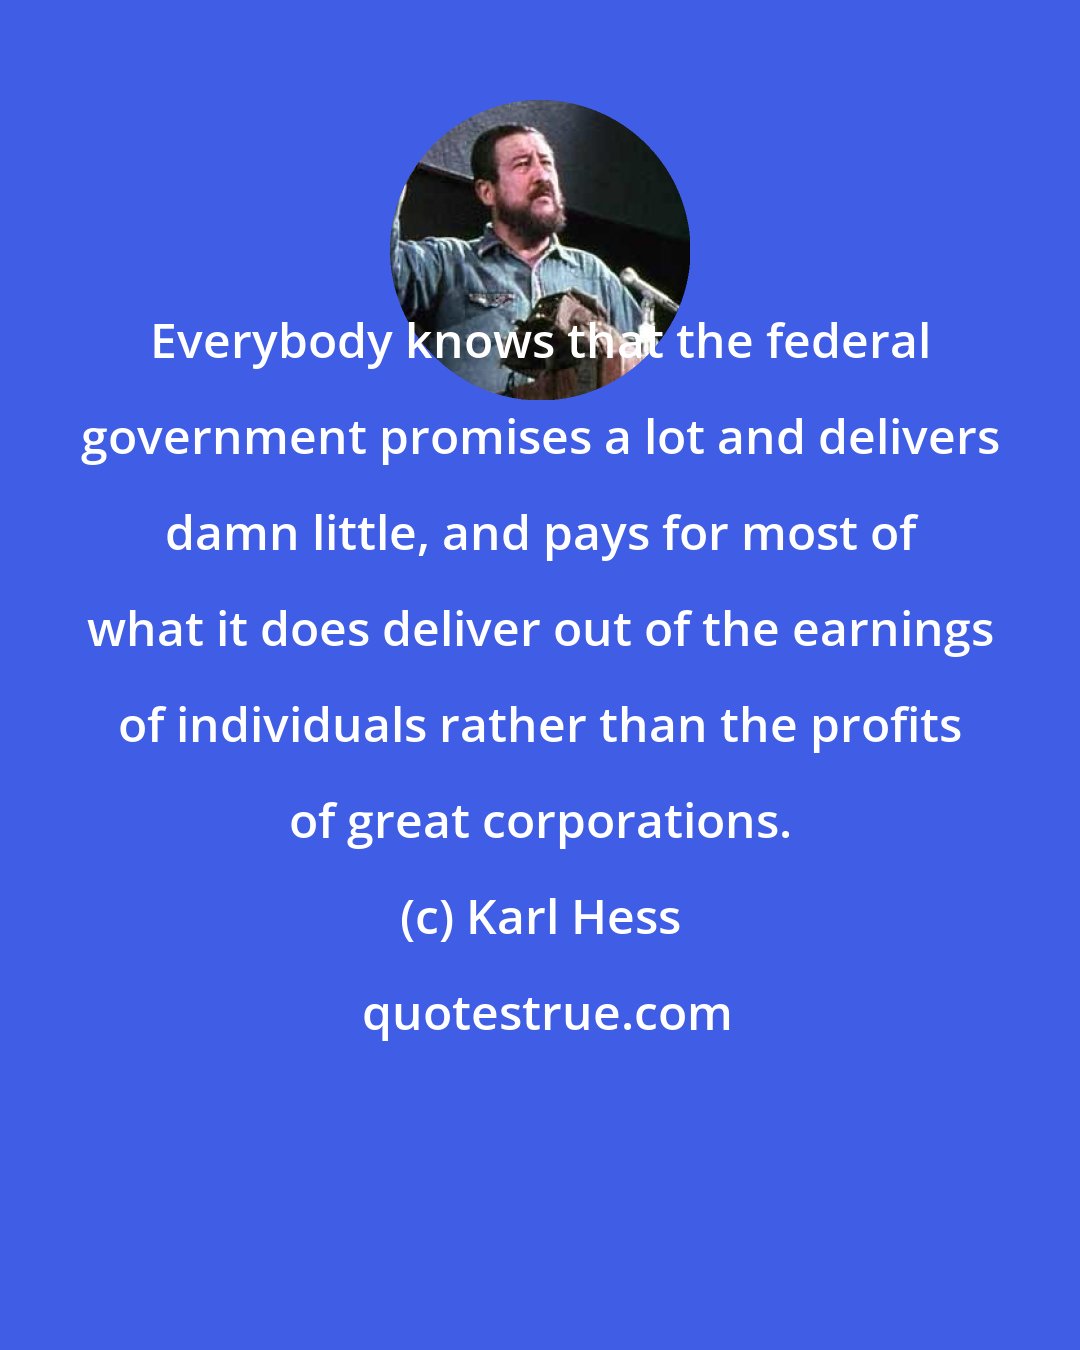 Karl Hess: Everybody knows that the federal government promises a lot and delivers damn little, and pays for most of what it does deliver out of the earnings of individuals rather than the profits of great corporations.